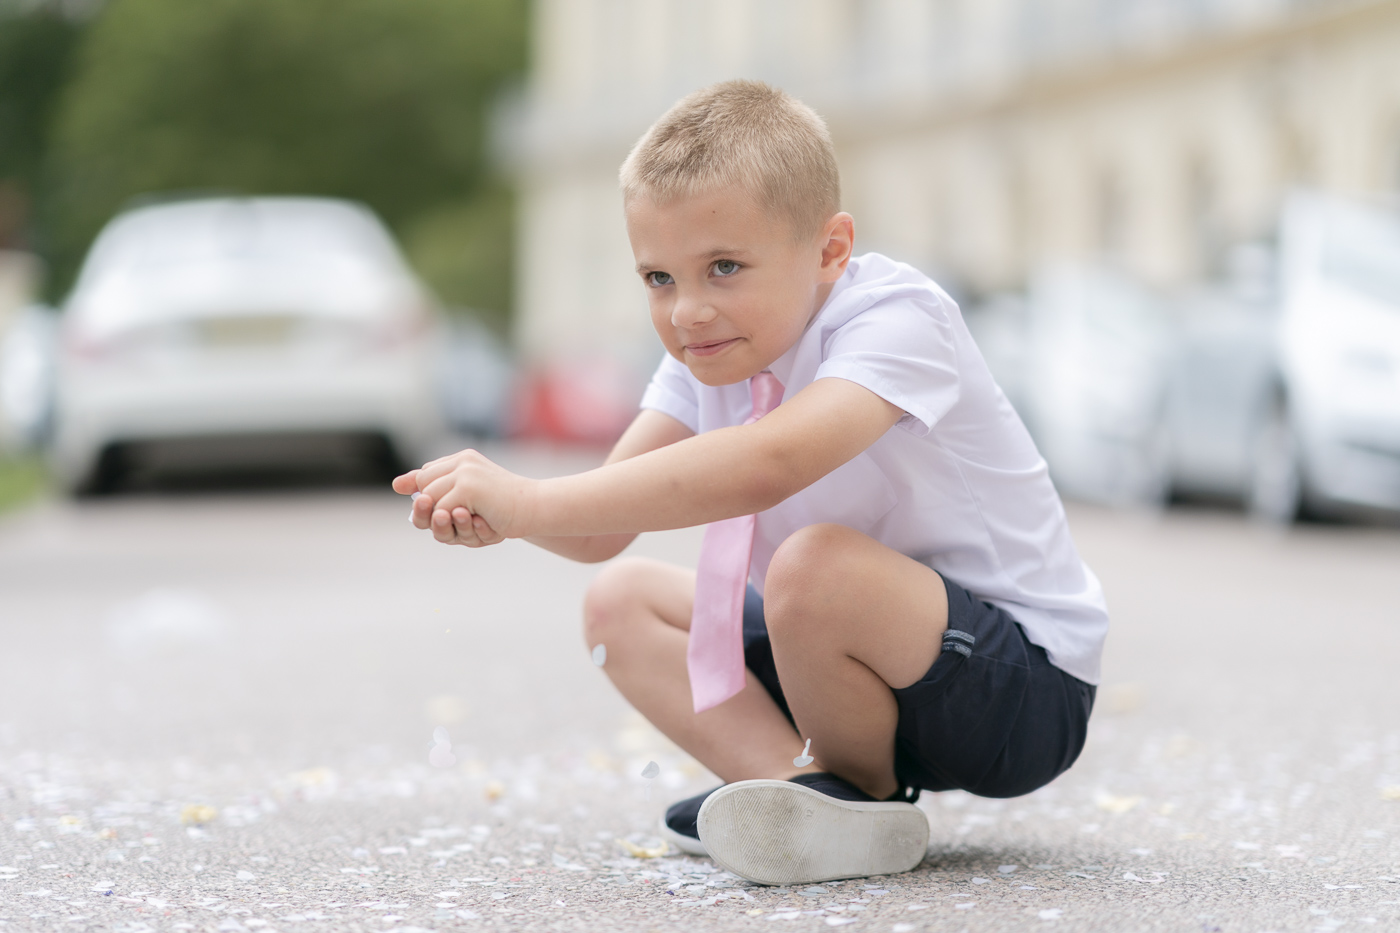 Boy gathering up the confetti from the floor